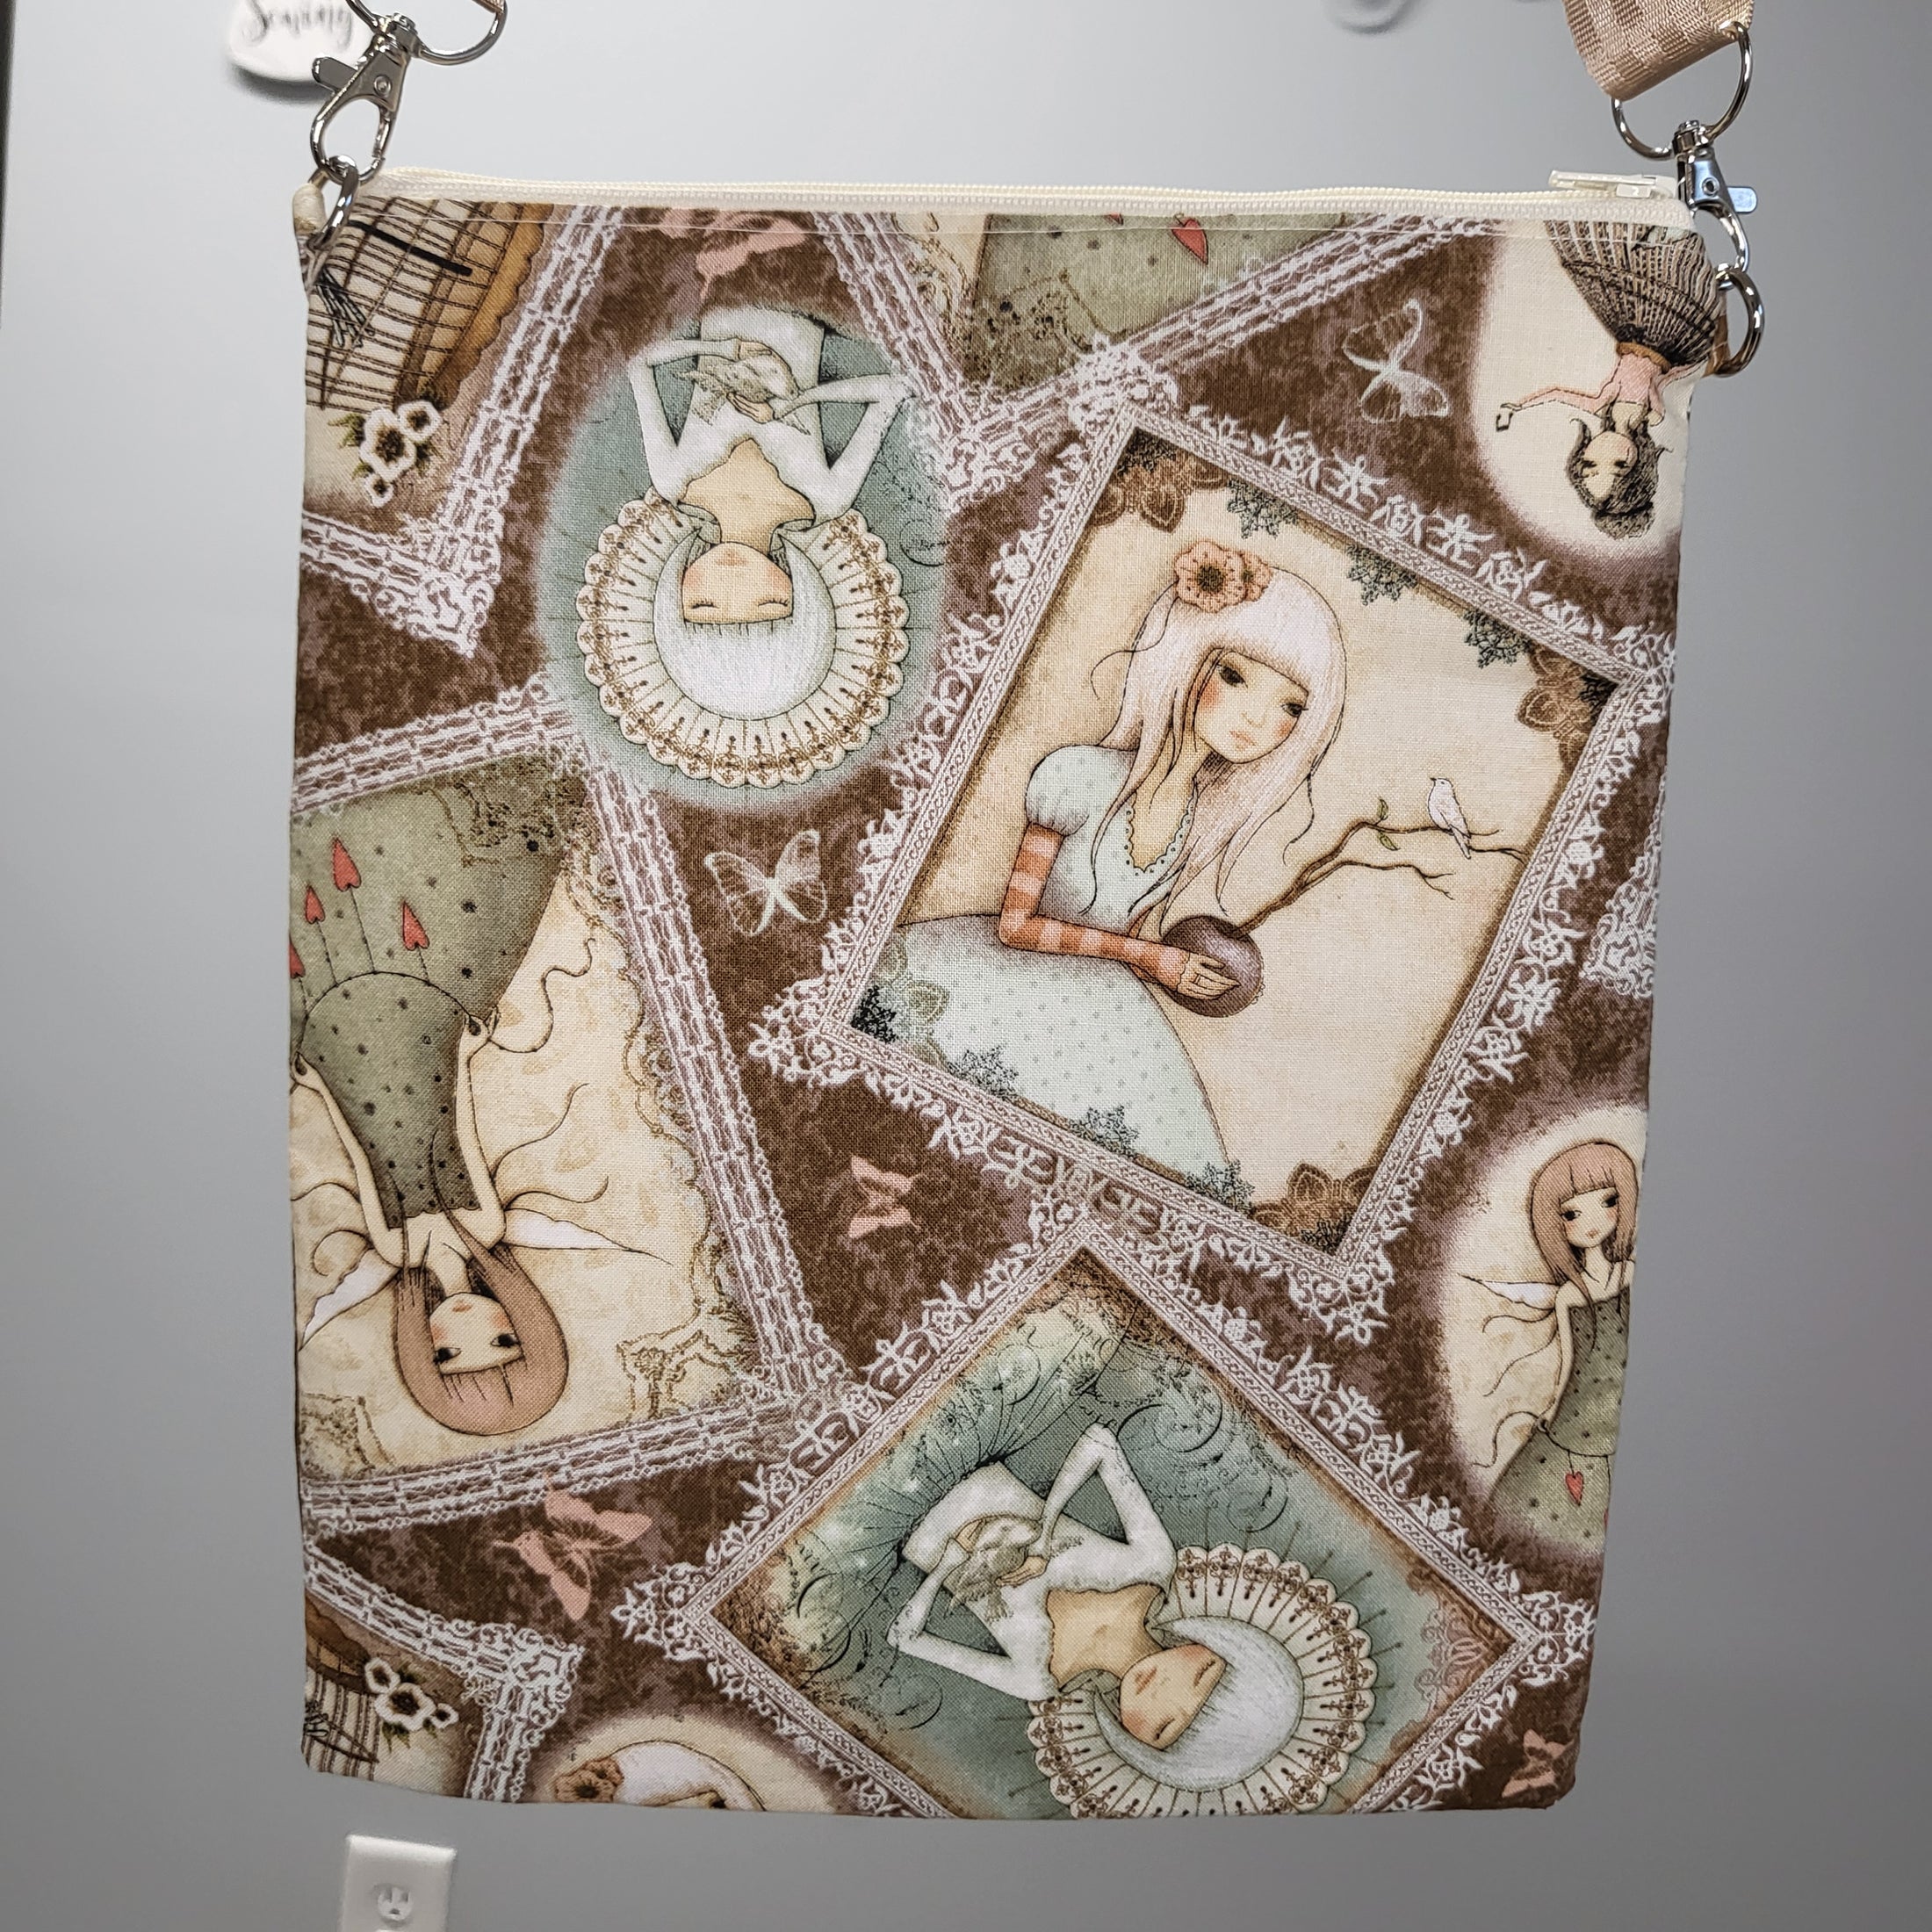 Back of the serenity and calm white dove purse showing frames of different ladies and fairies. 